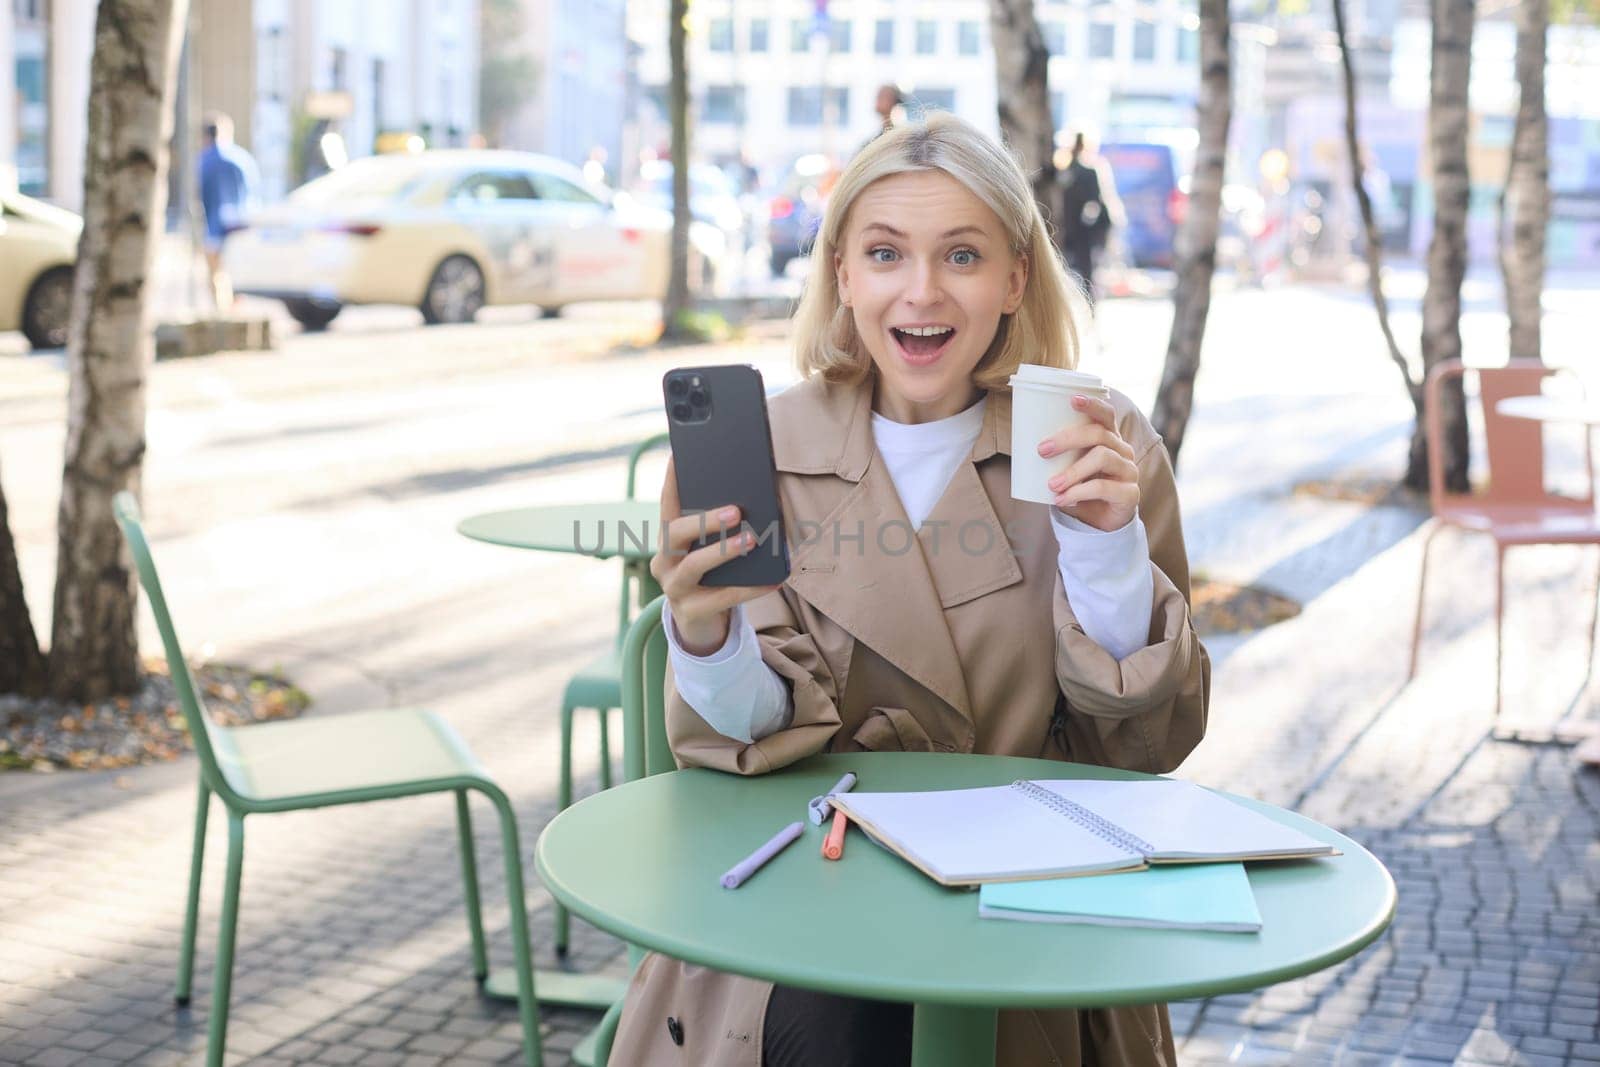 Image of girl with coffee and smartphone, sitting on street, looking surprised, gasping at camera.